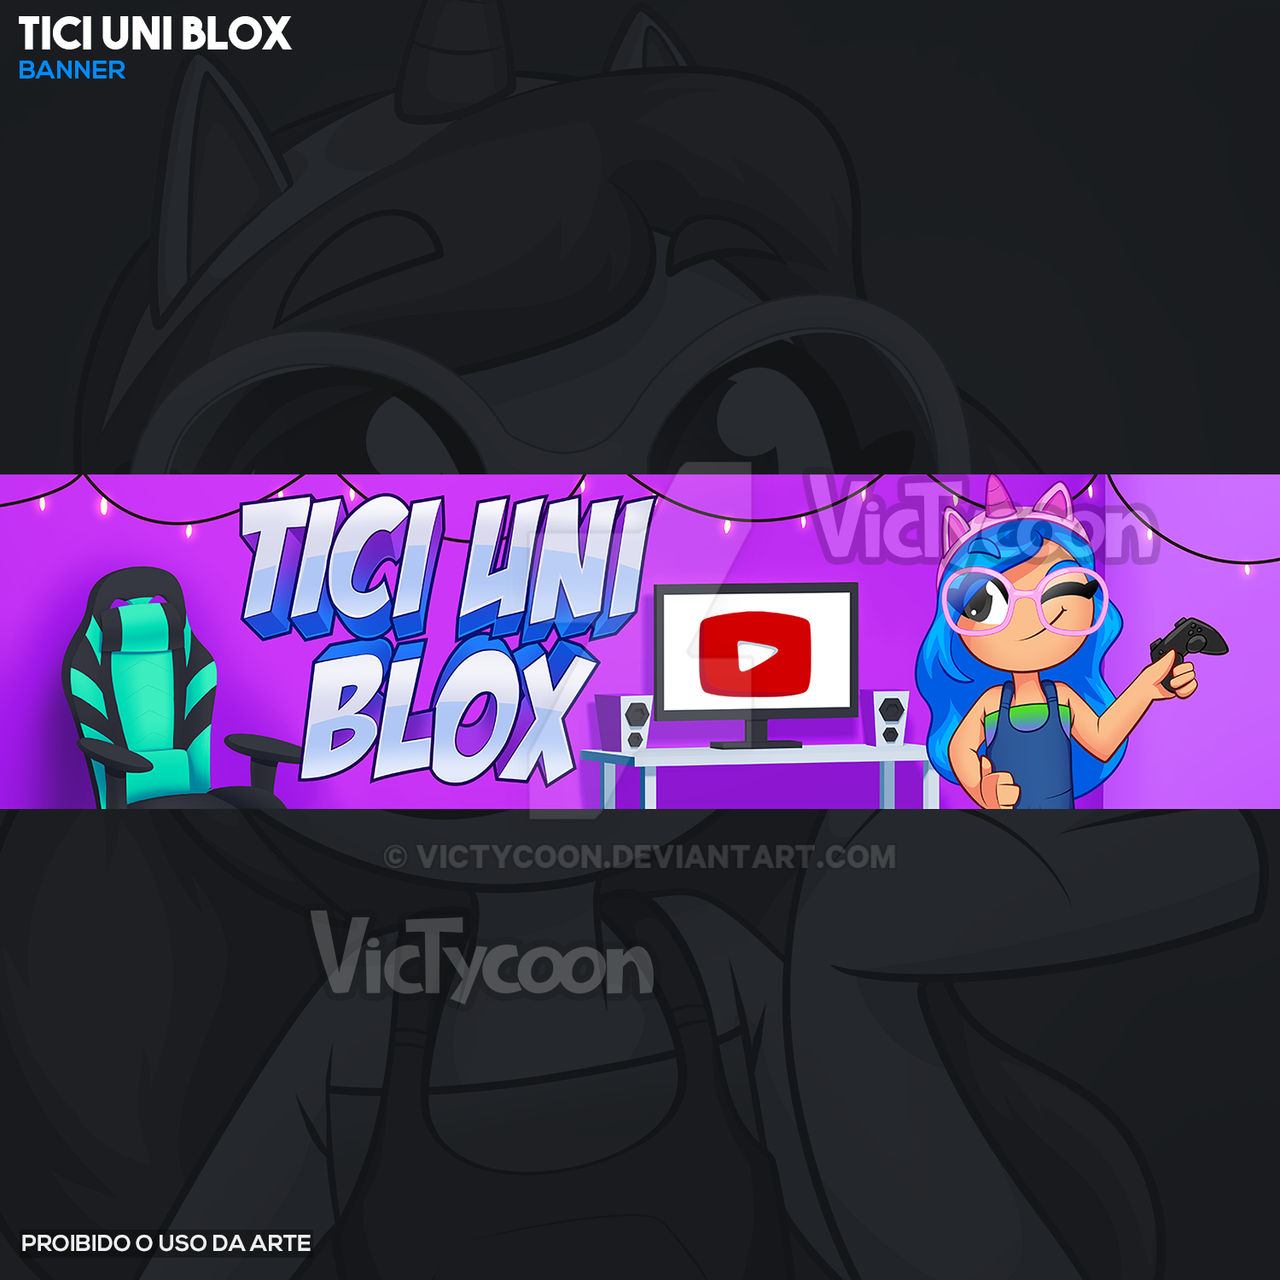 EMOTE PACK - Gaby Blox ( Roblox) by VicTycoon on DeviantArt